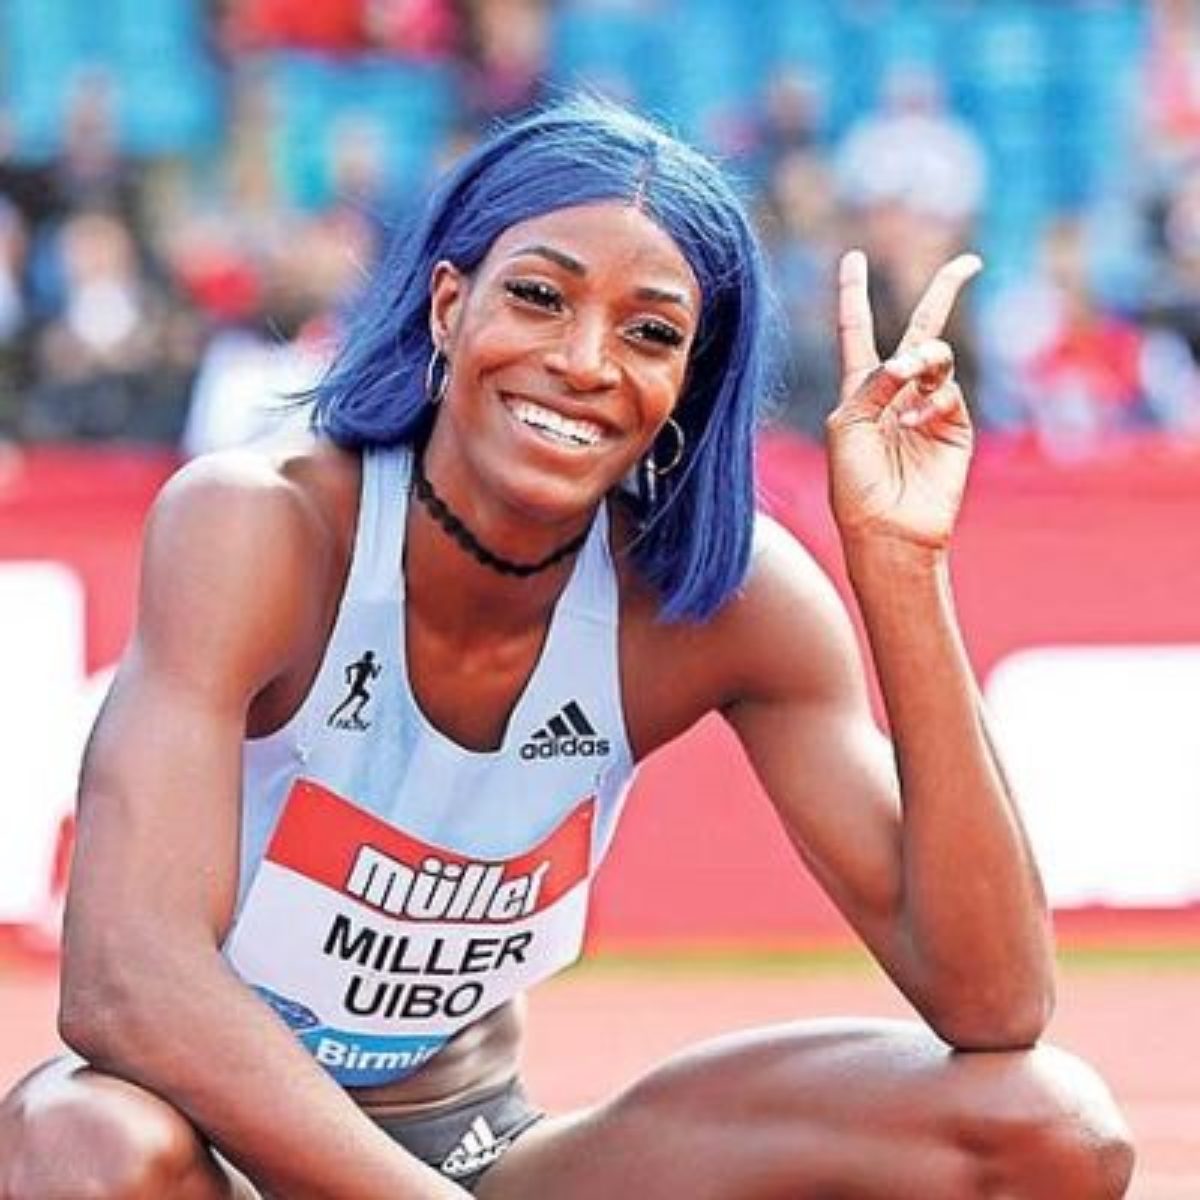 The 28-year old daughter of father (?) and mother(?) Shaunae Miller-Uibo in 2022 photo. Shaunae Miller-Uibo earned a  million dollar salary - leaving the net worth at  million in 2022